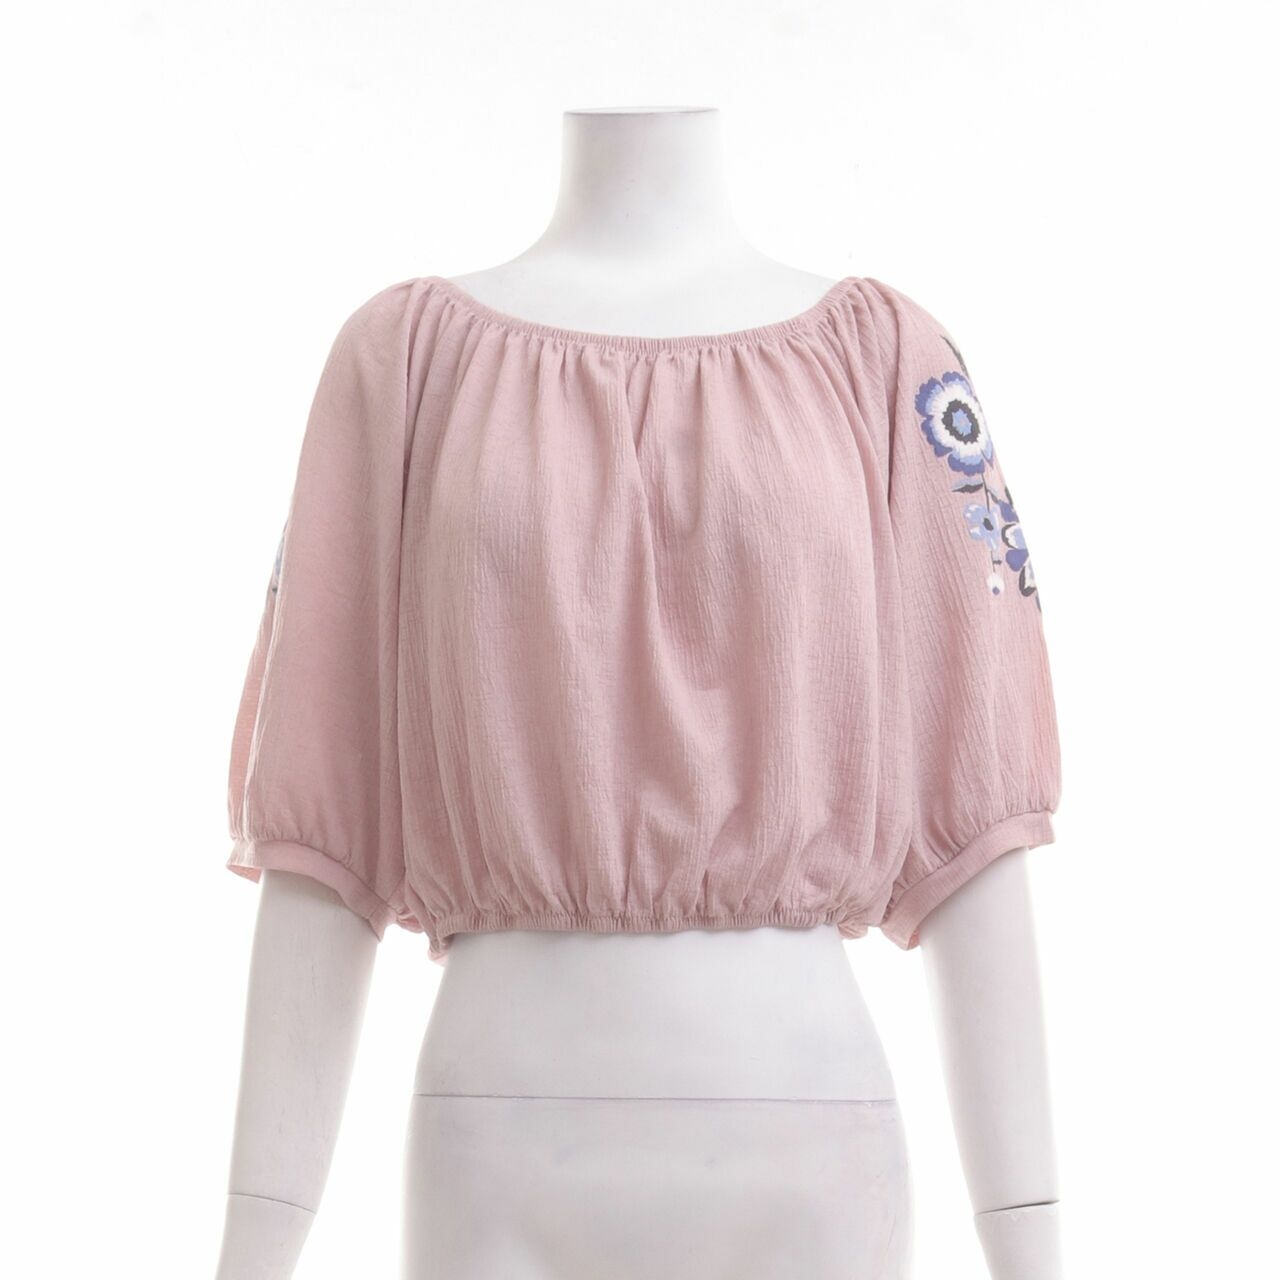 Max Dusty Pink Blouse